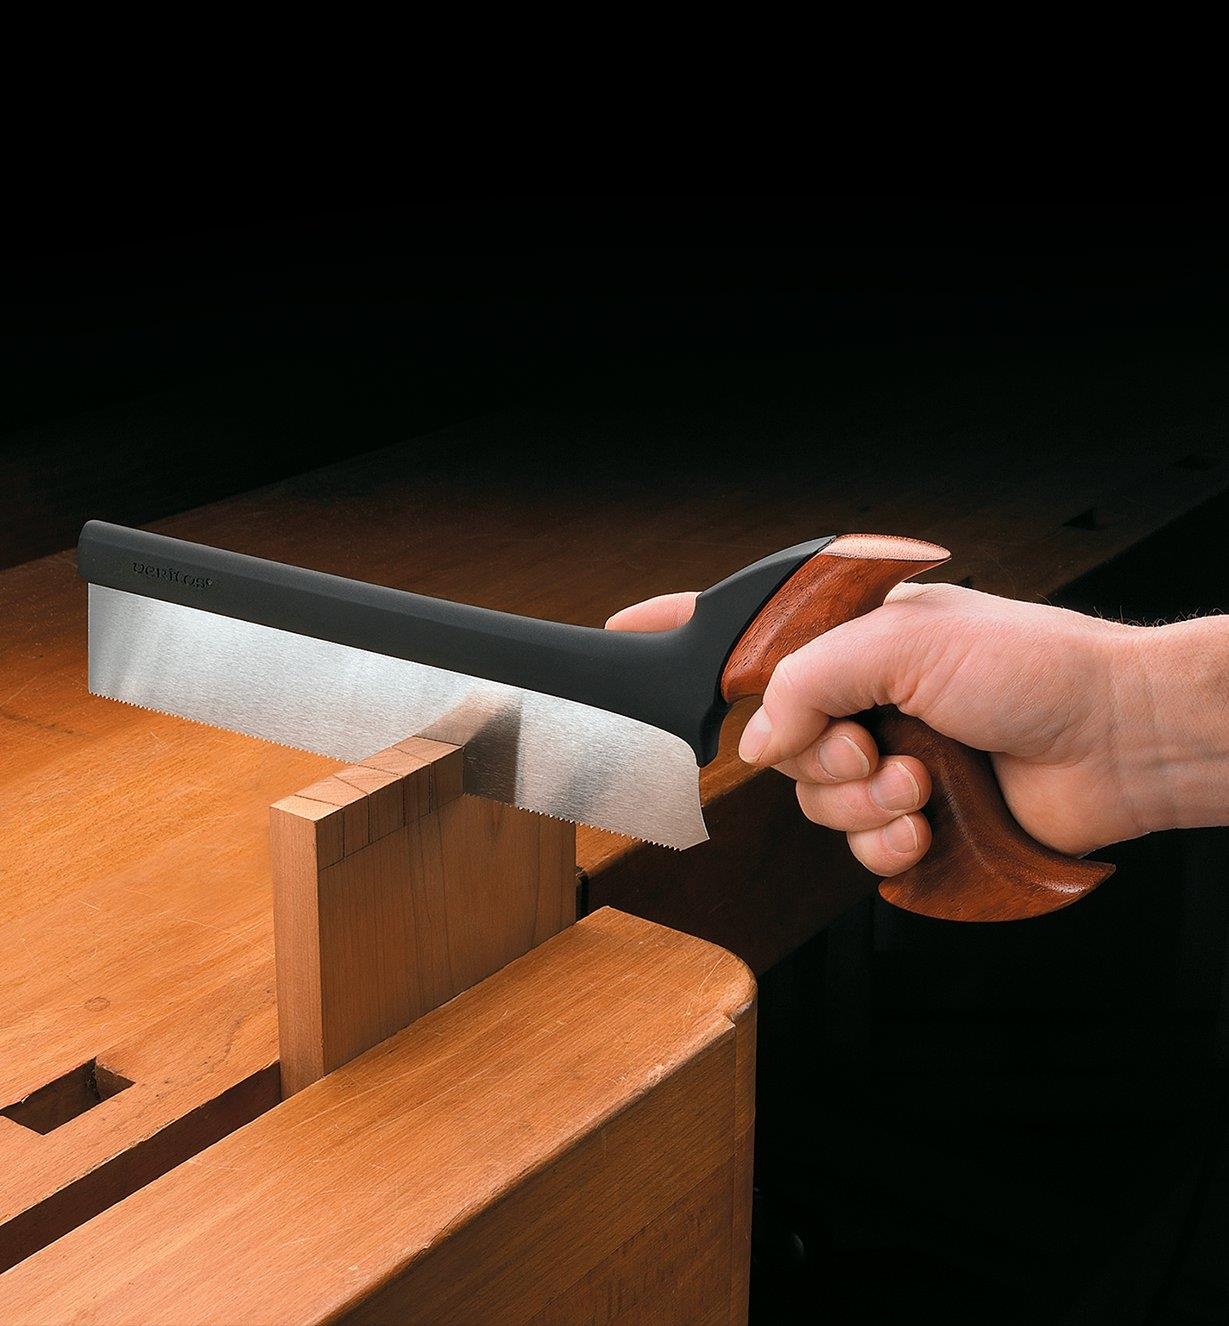 Cutting into a board with a Veritas Standard Dovetail Saw